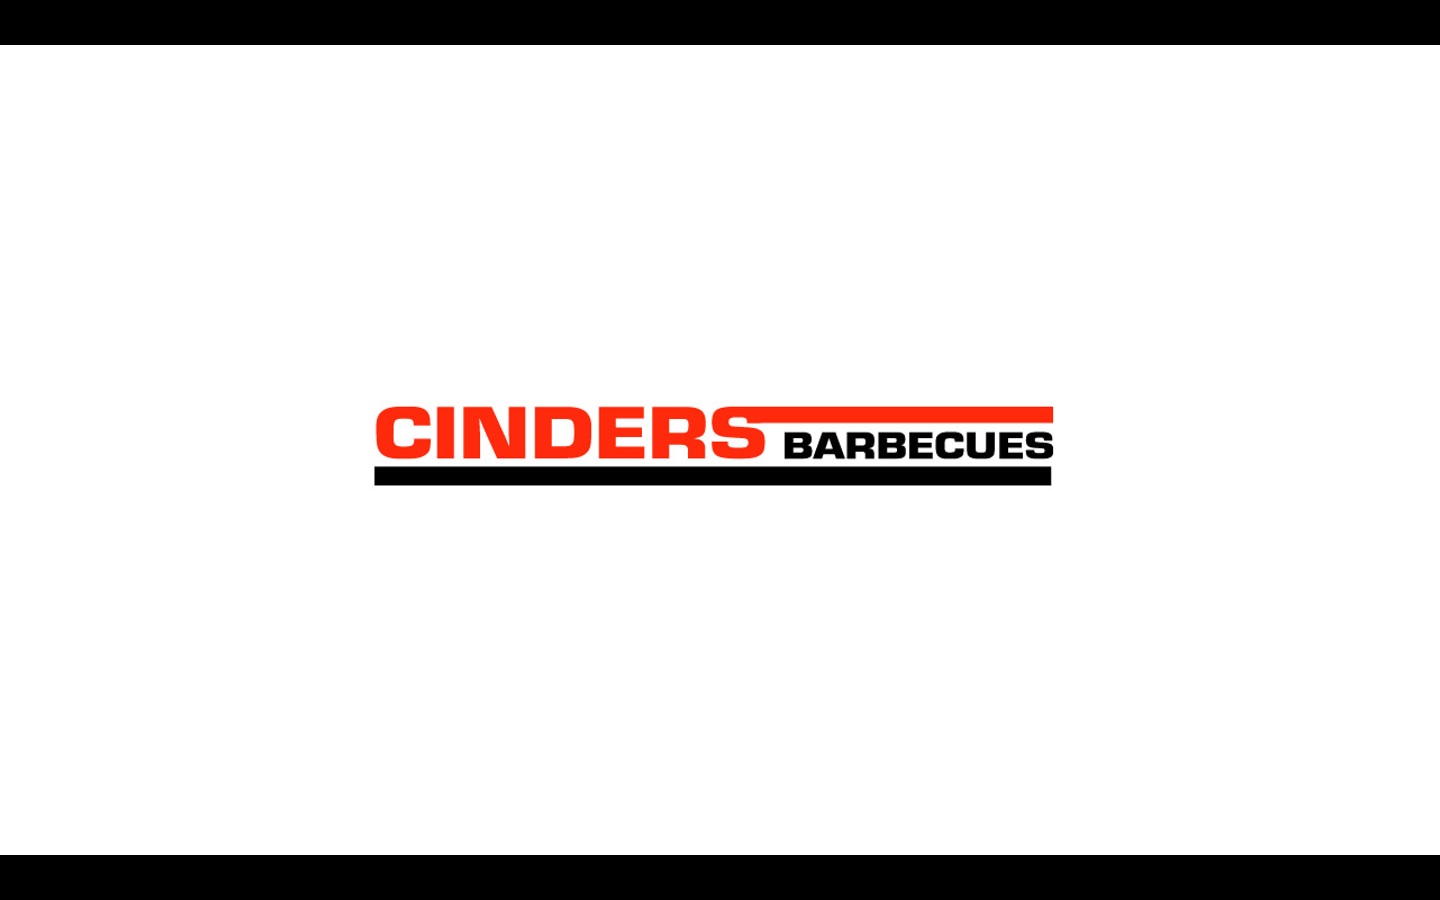 CINDERS BARBECUES LIMITED